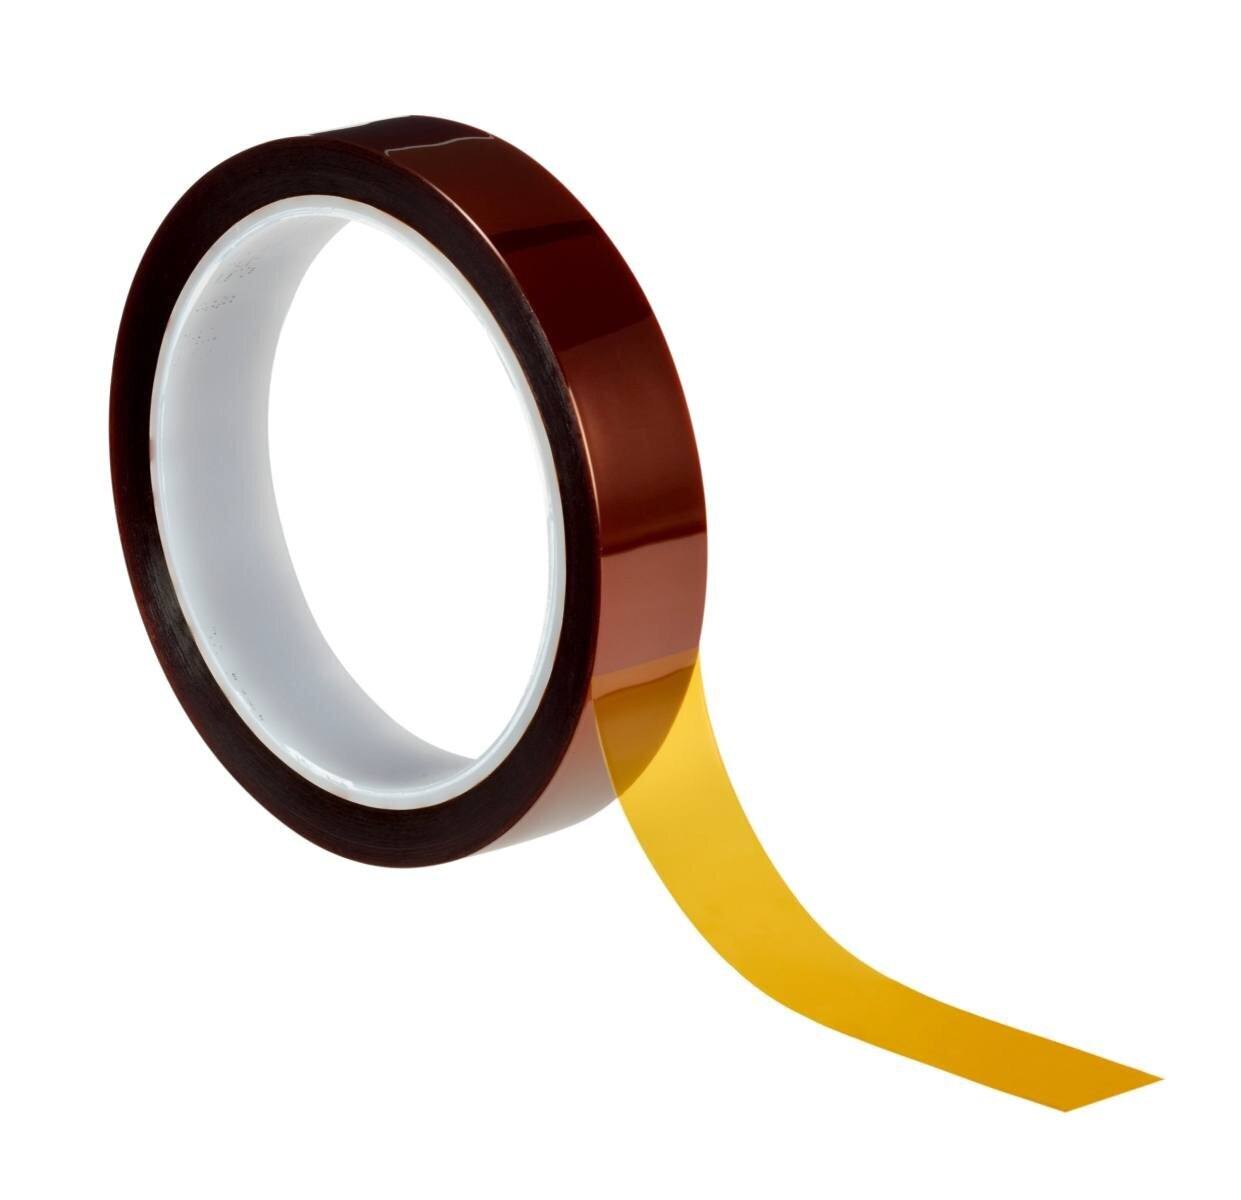 3M high temperature polyimide adhesive tape 5413, brown, 6 mm x 33 m, 68.58 µm